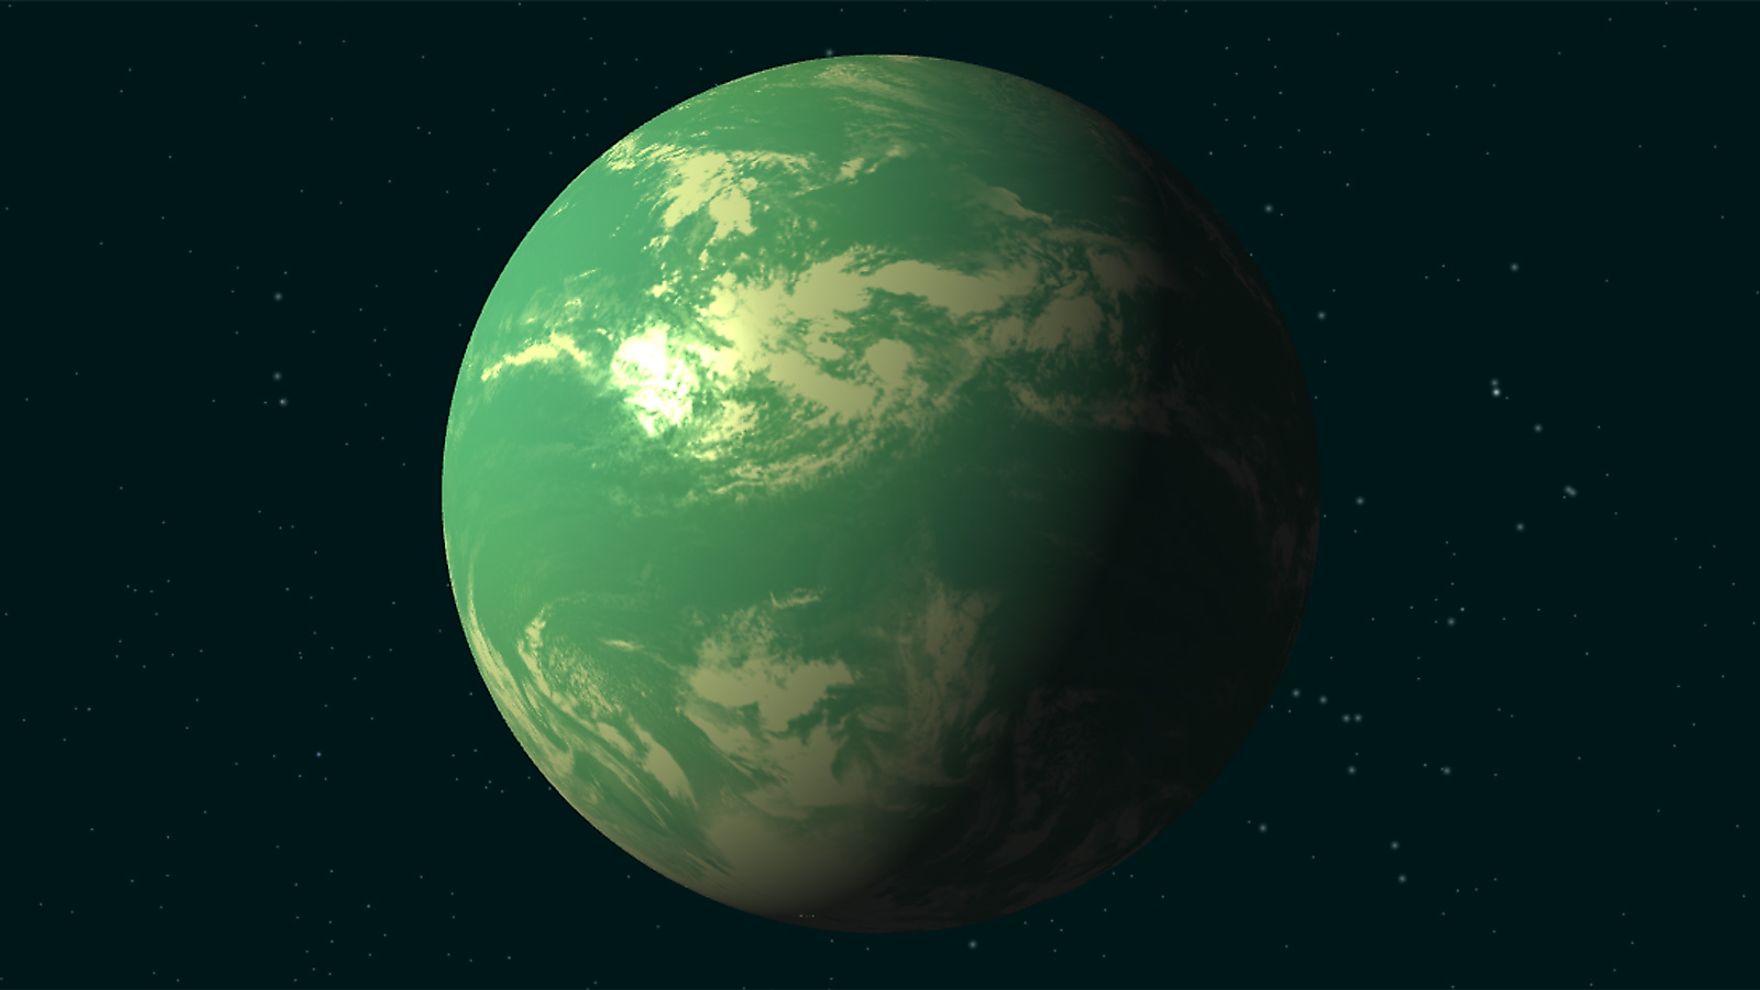 An Illustration of Kepler 22b, An Exoplanet Almost Twice as Big as Earth